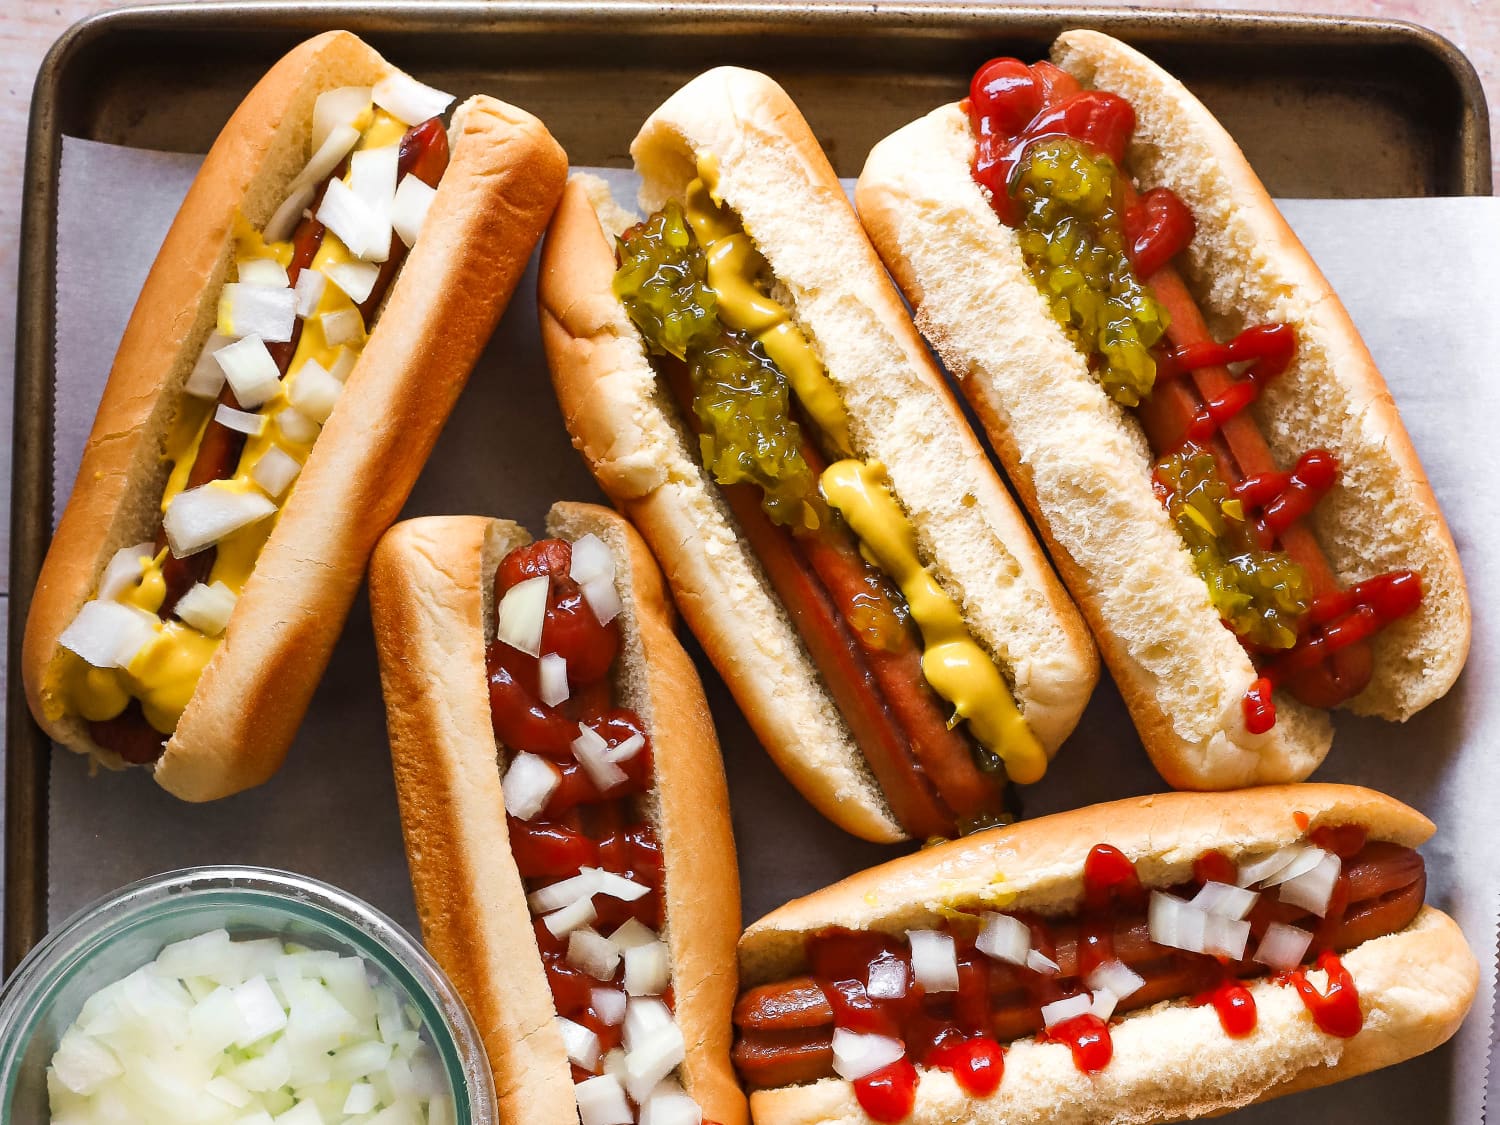 Baked Hot Dogs Recipe (Oven Method) | The Kitchn